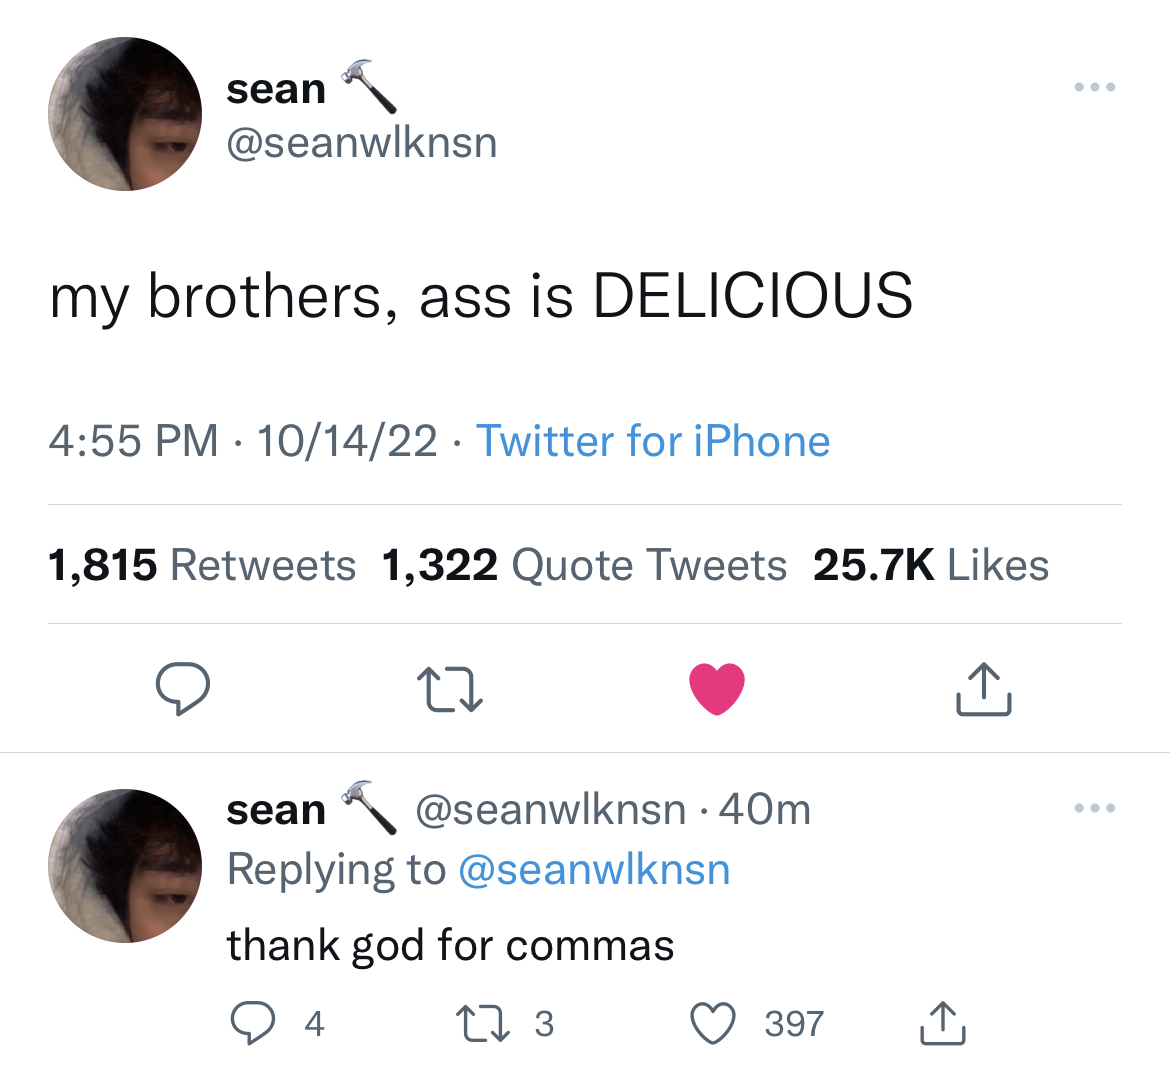 savage tweets to start the week - alexandria ocasio cortez elon musk tweet - sean my brothers, ass is Delicious 101422 Twitter for iPhone 1,815 1,322 Quote Tweets 27 sean . 40m thank god for commas Q4 17 3 397